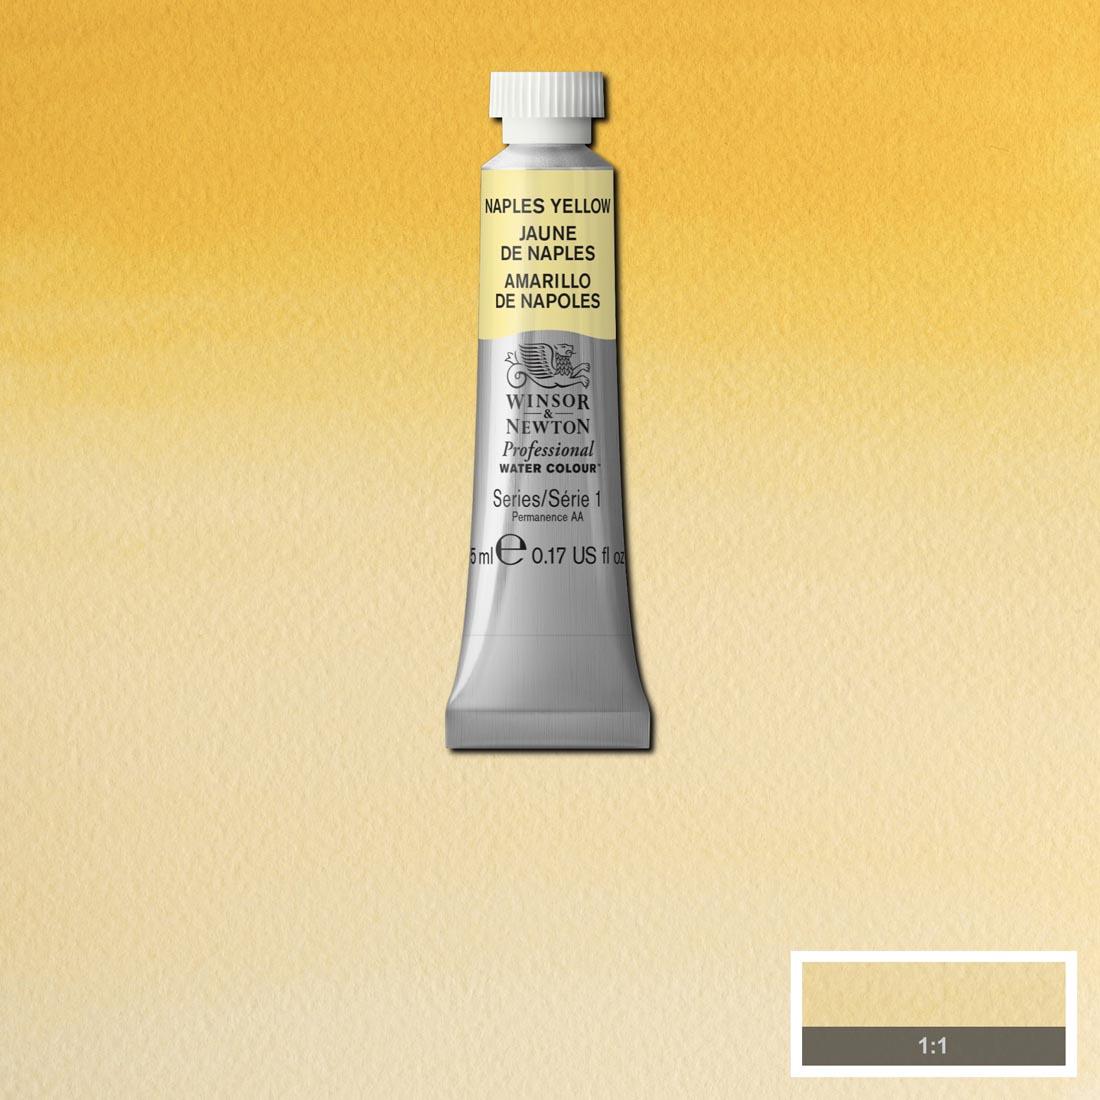 Tube of Naples Yellow Winsor & Newton Professional Water Colour with a paint swatch for the background